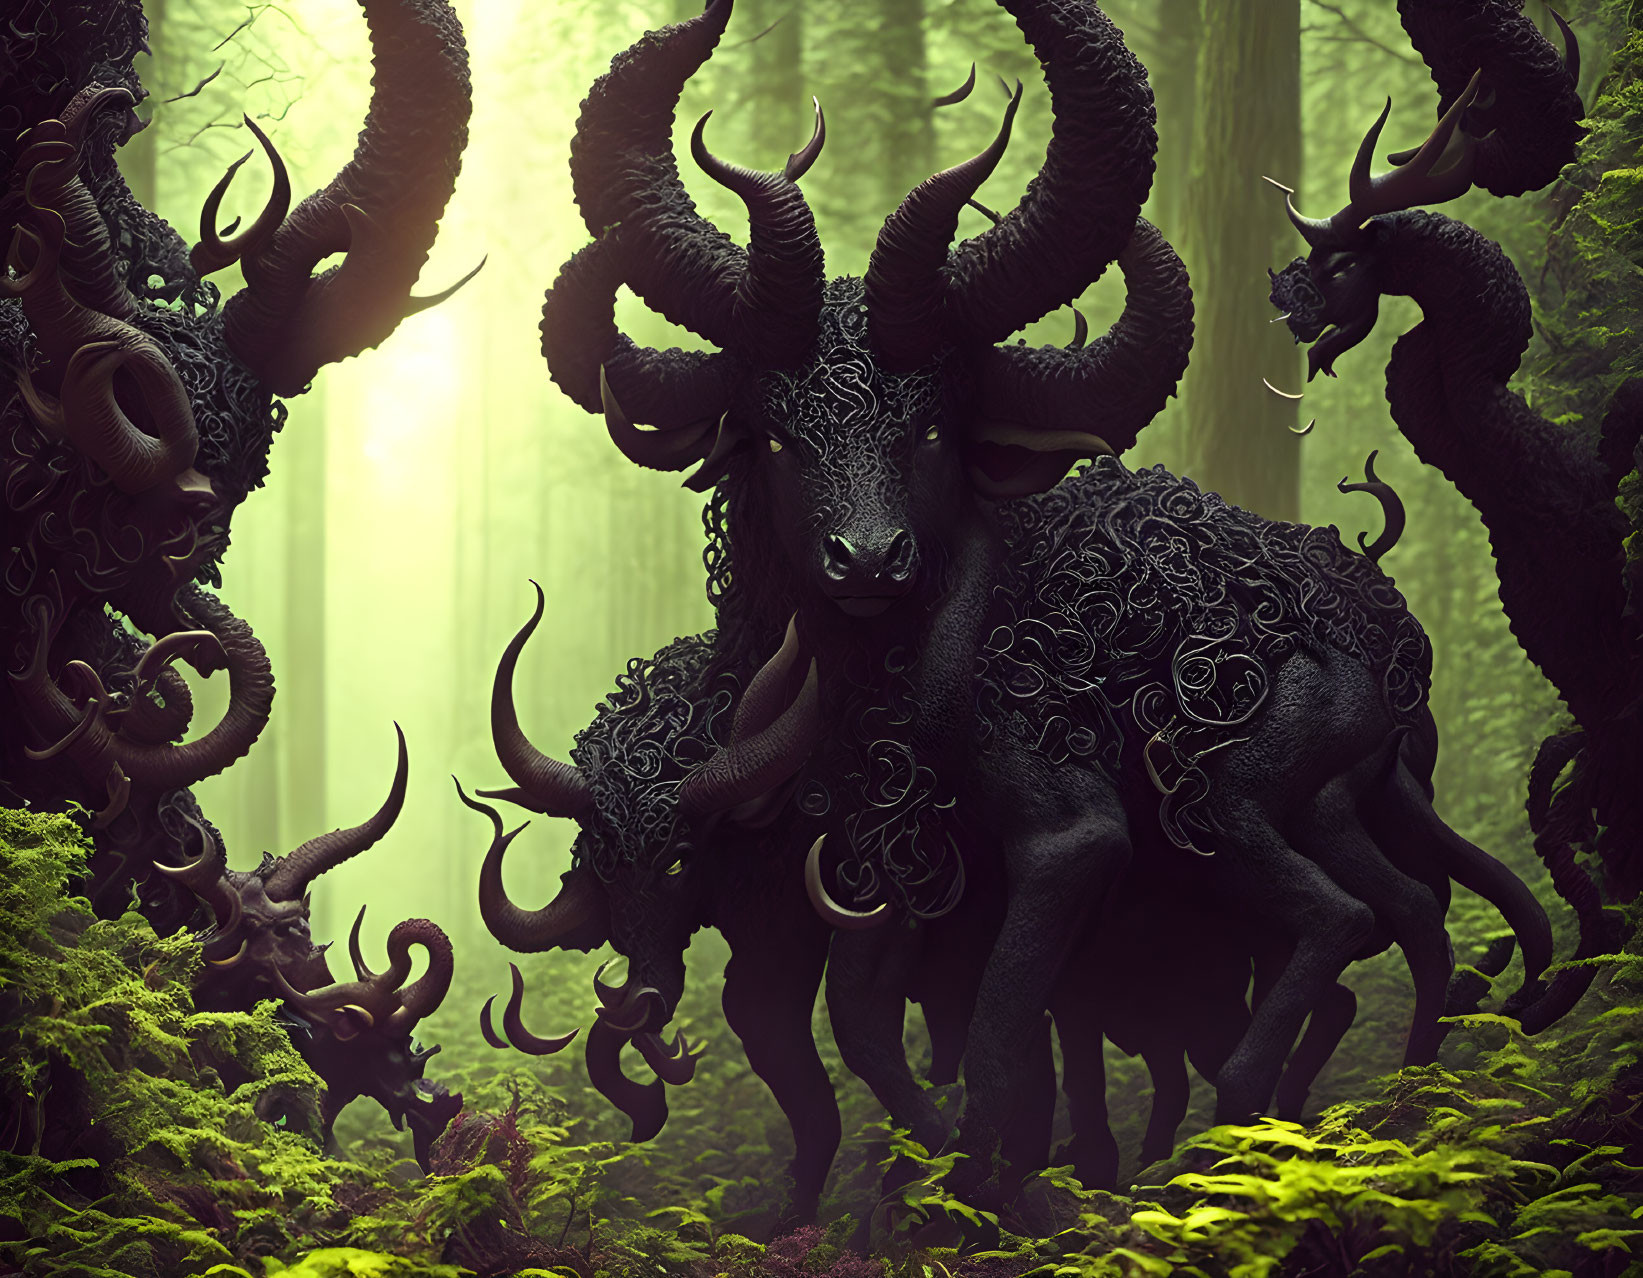 Mythic creature with curled horns in lush forest scene